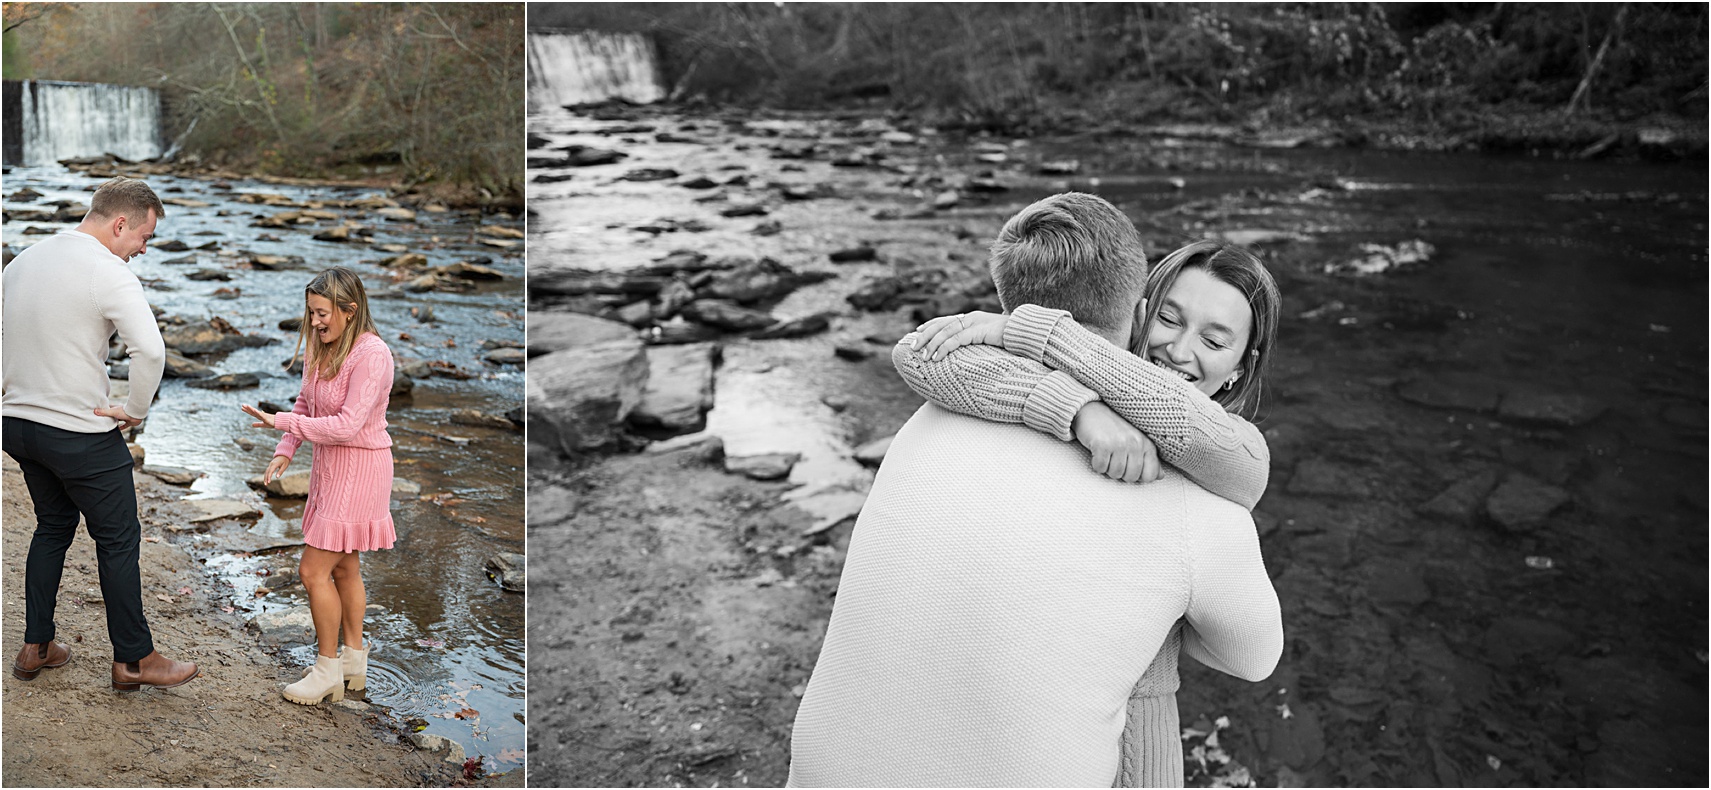 Roswell Mill proposal, Roswell Mill proposal photographer, Roswell Mill proposal photography, Roswell wedding photographer, Roswell wedding photography, Atlanta proposal photographer, Atlanta proposal photography, Atlanta proposal